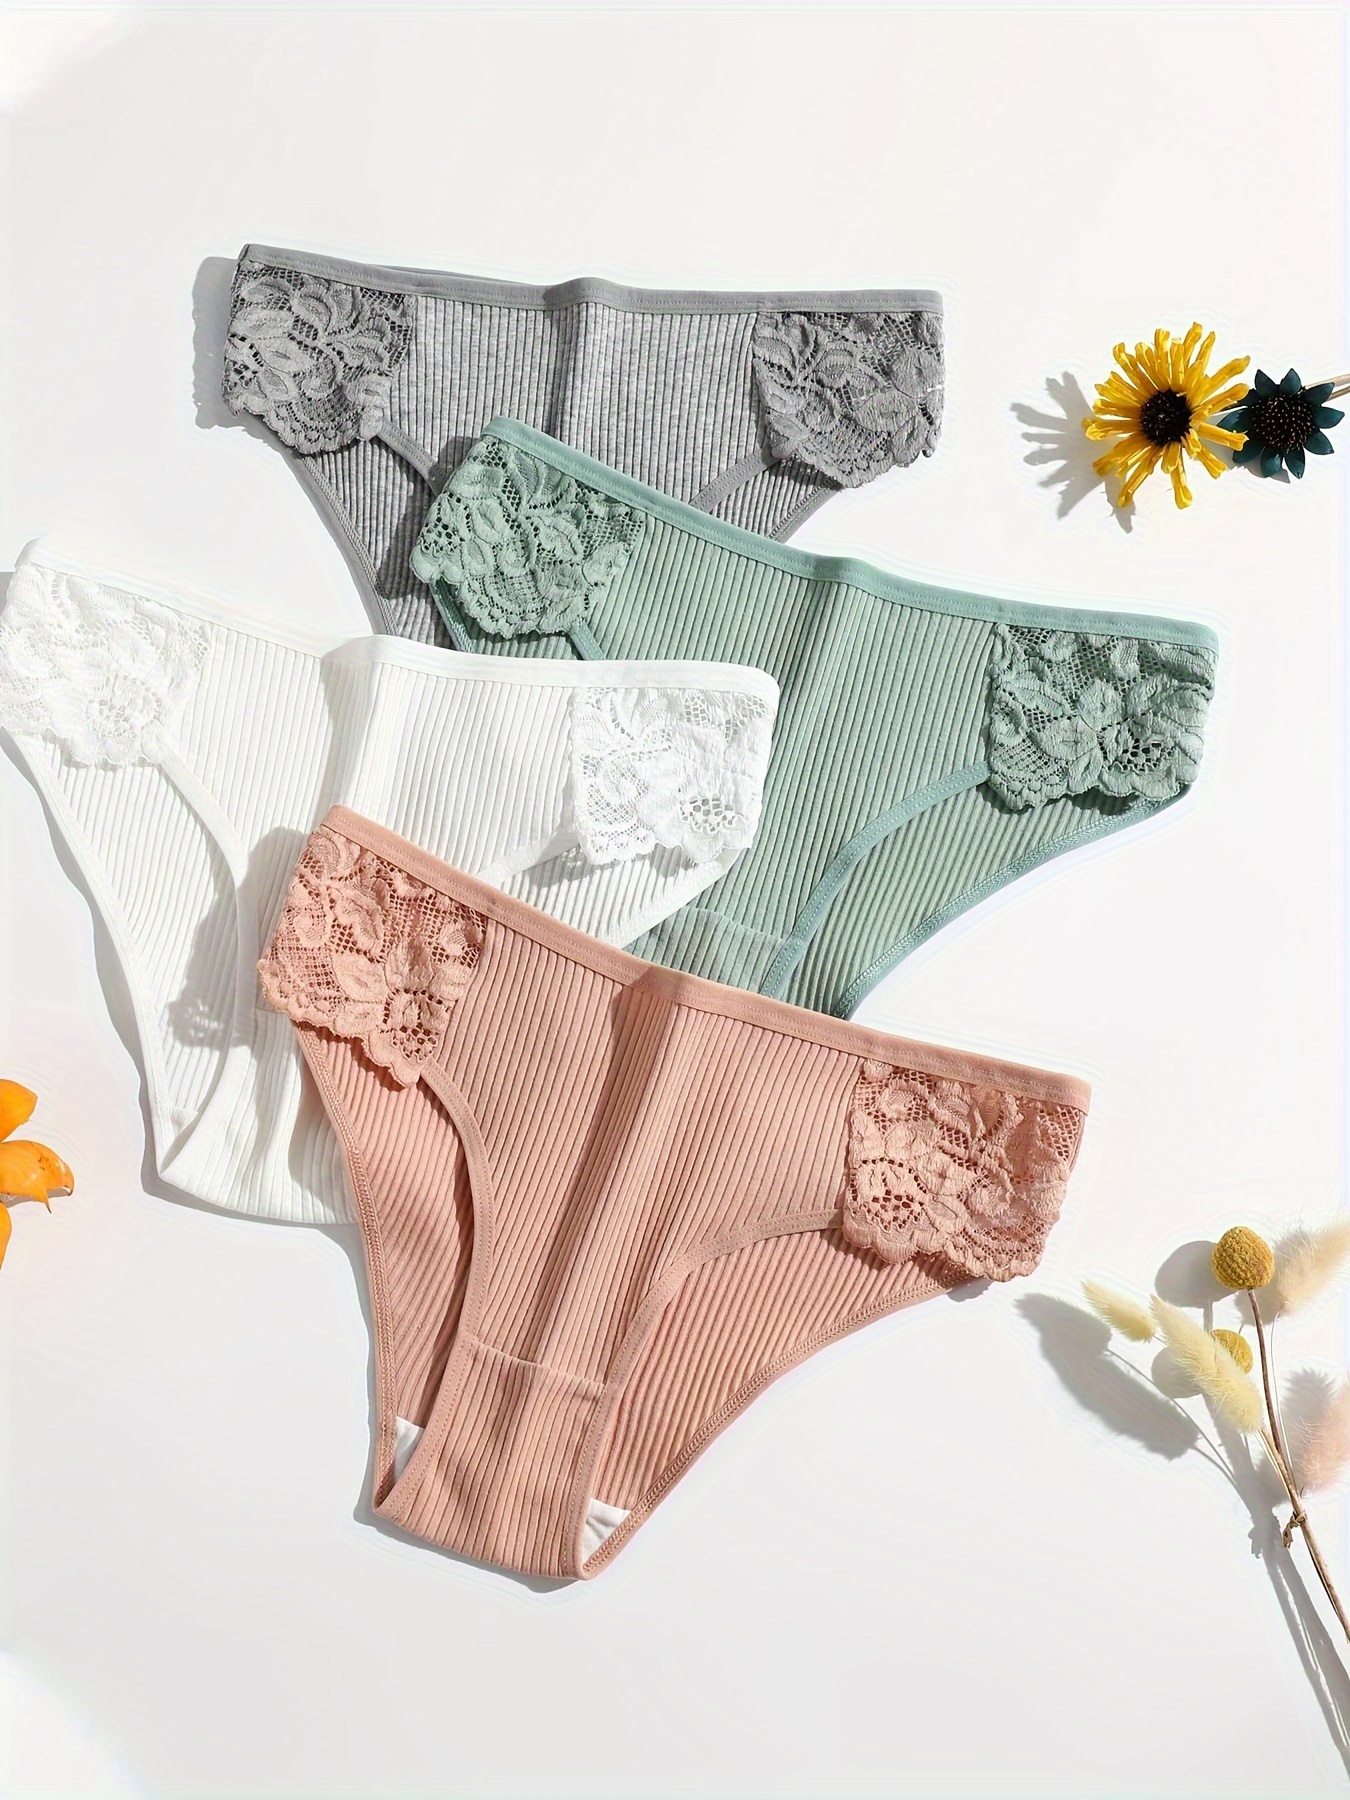 New Fashion Low Waist Lace Lace Panties For Women For Women